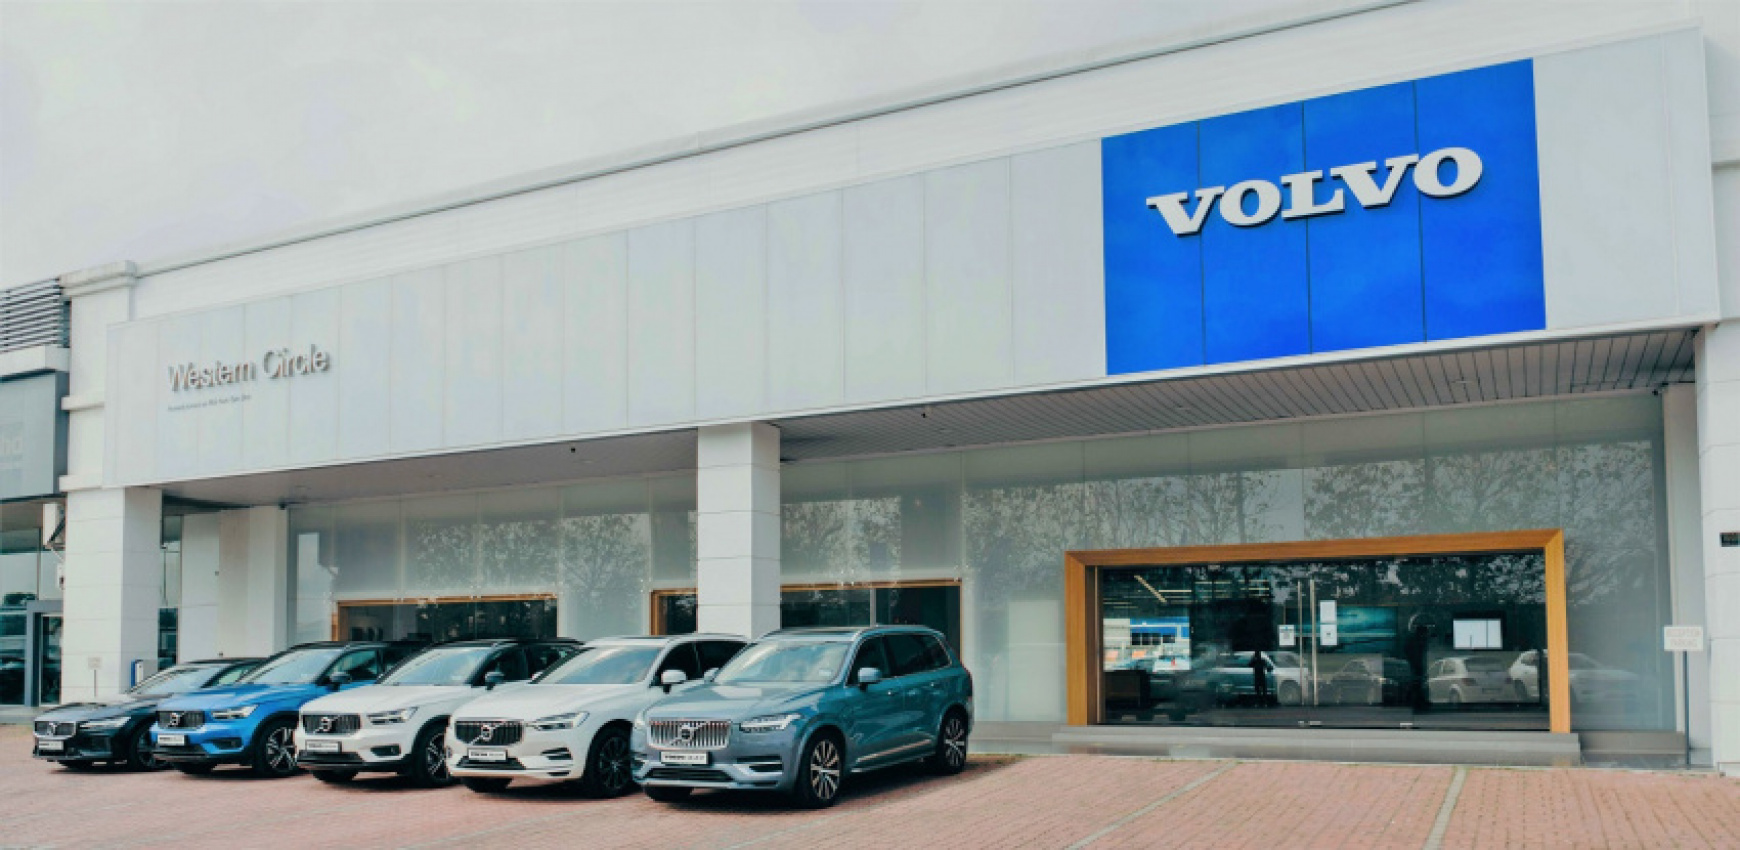 autos, car brands, cars, volvo, automotive, cars, malaysia, penang, pre-owned, used cars, volvo car malaysia, volvo cars, volvo selekt, western circle (pg) sdn bhd, volvo selekt pre-owned cars now available in penang